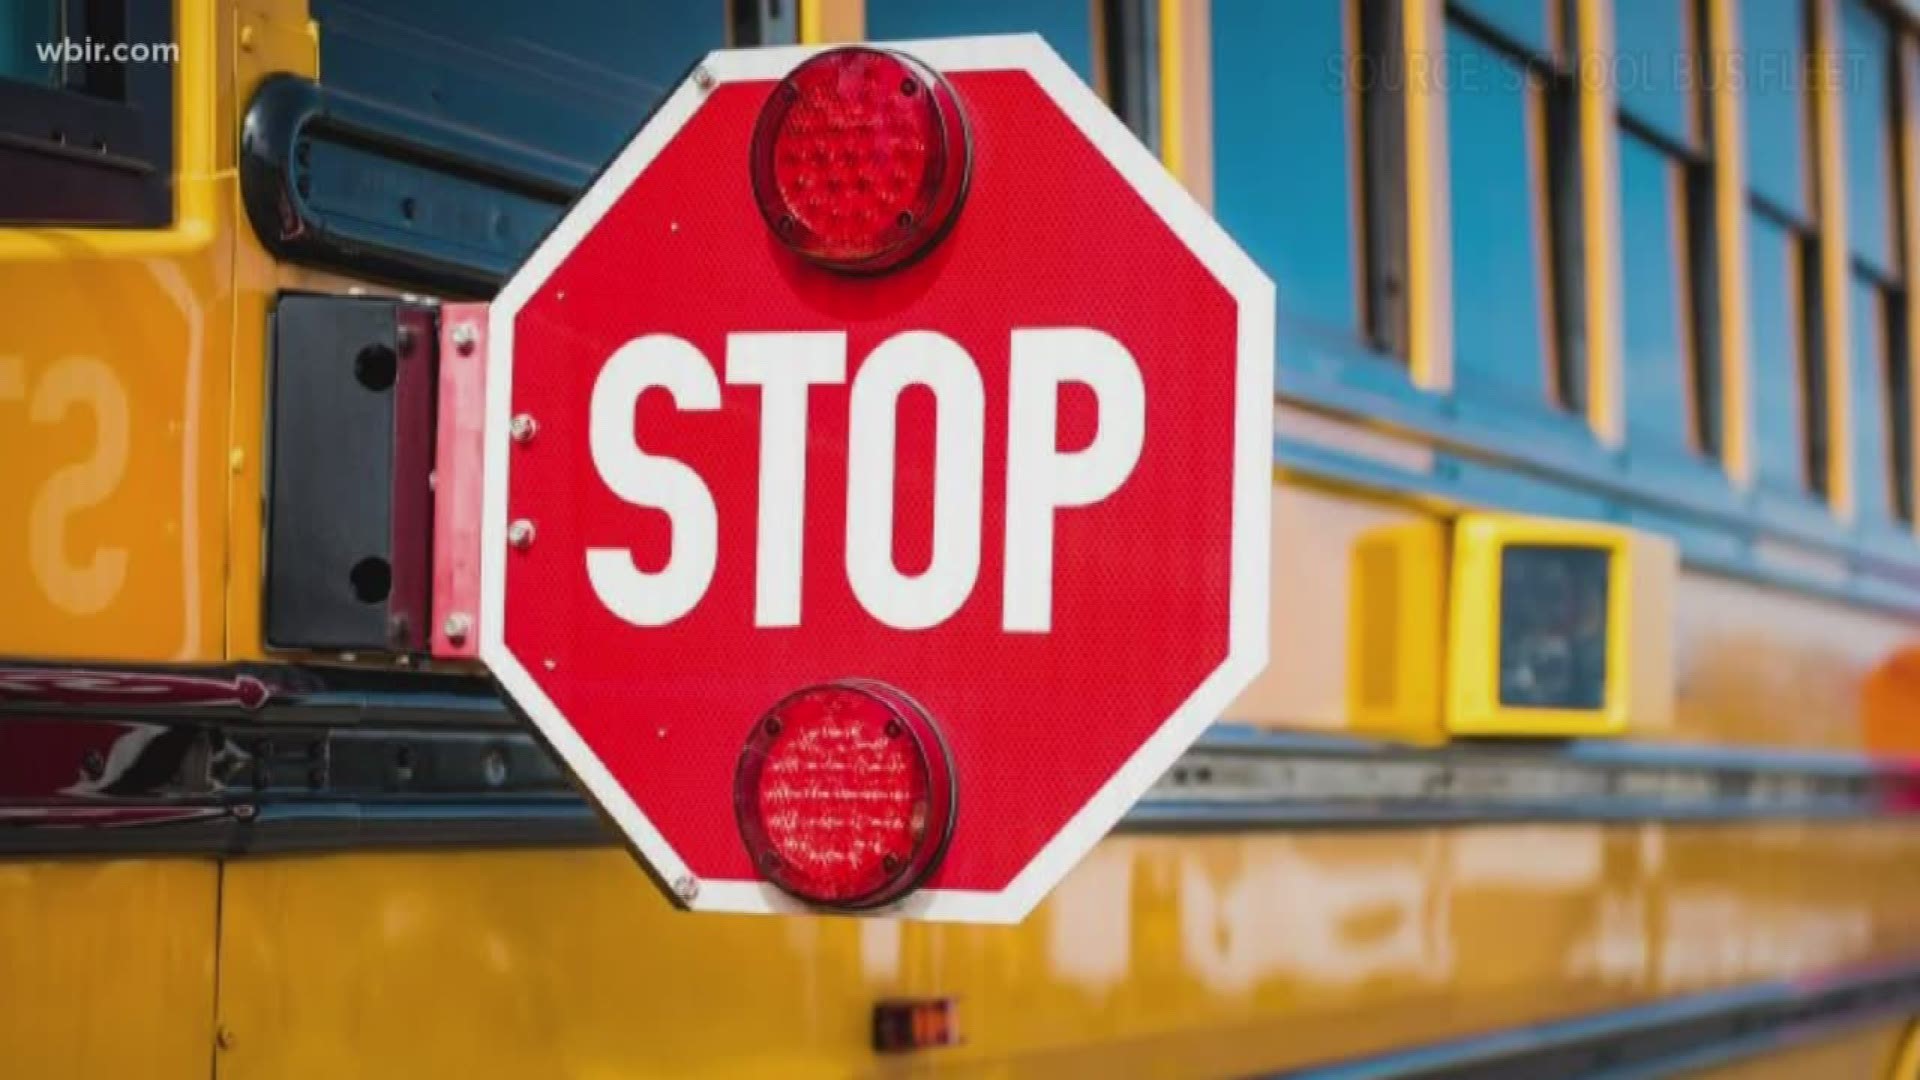 Tennessee addressed school bus safety in its COVID-19 toolkit for school districts to help them reopen.